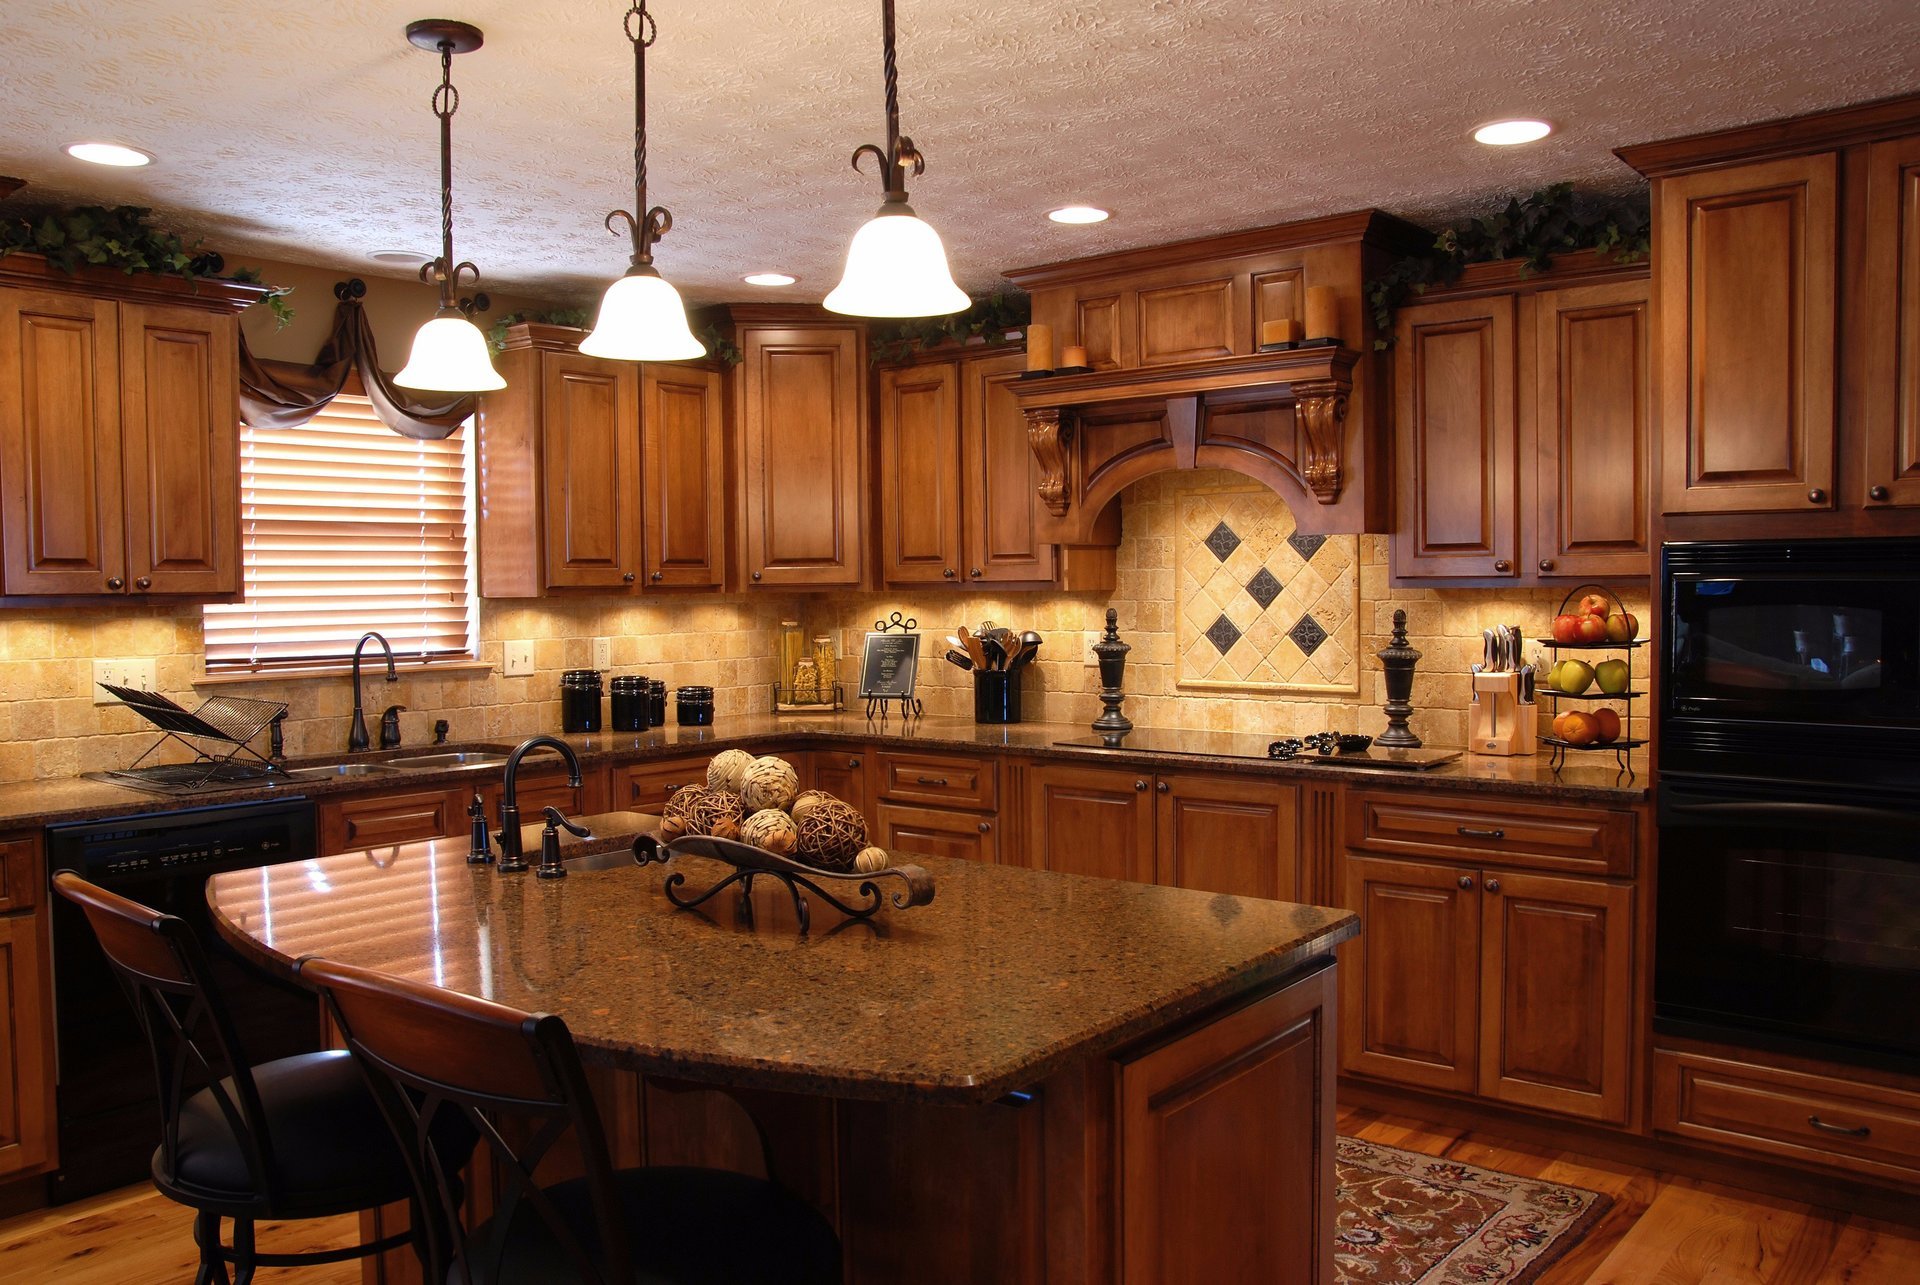 Custom Kitchen Cabinets: Natural Focal Points (Link Roundup)